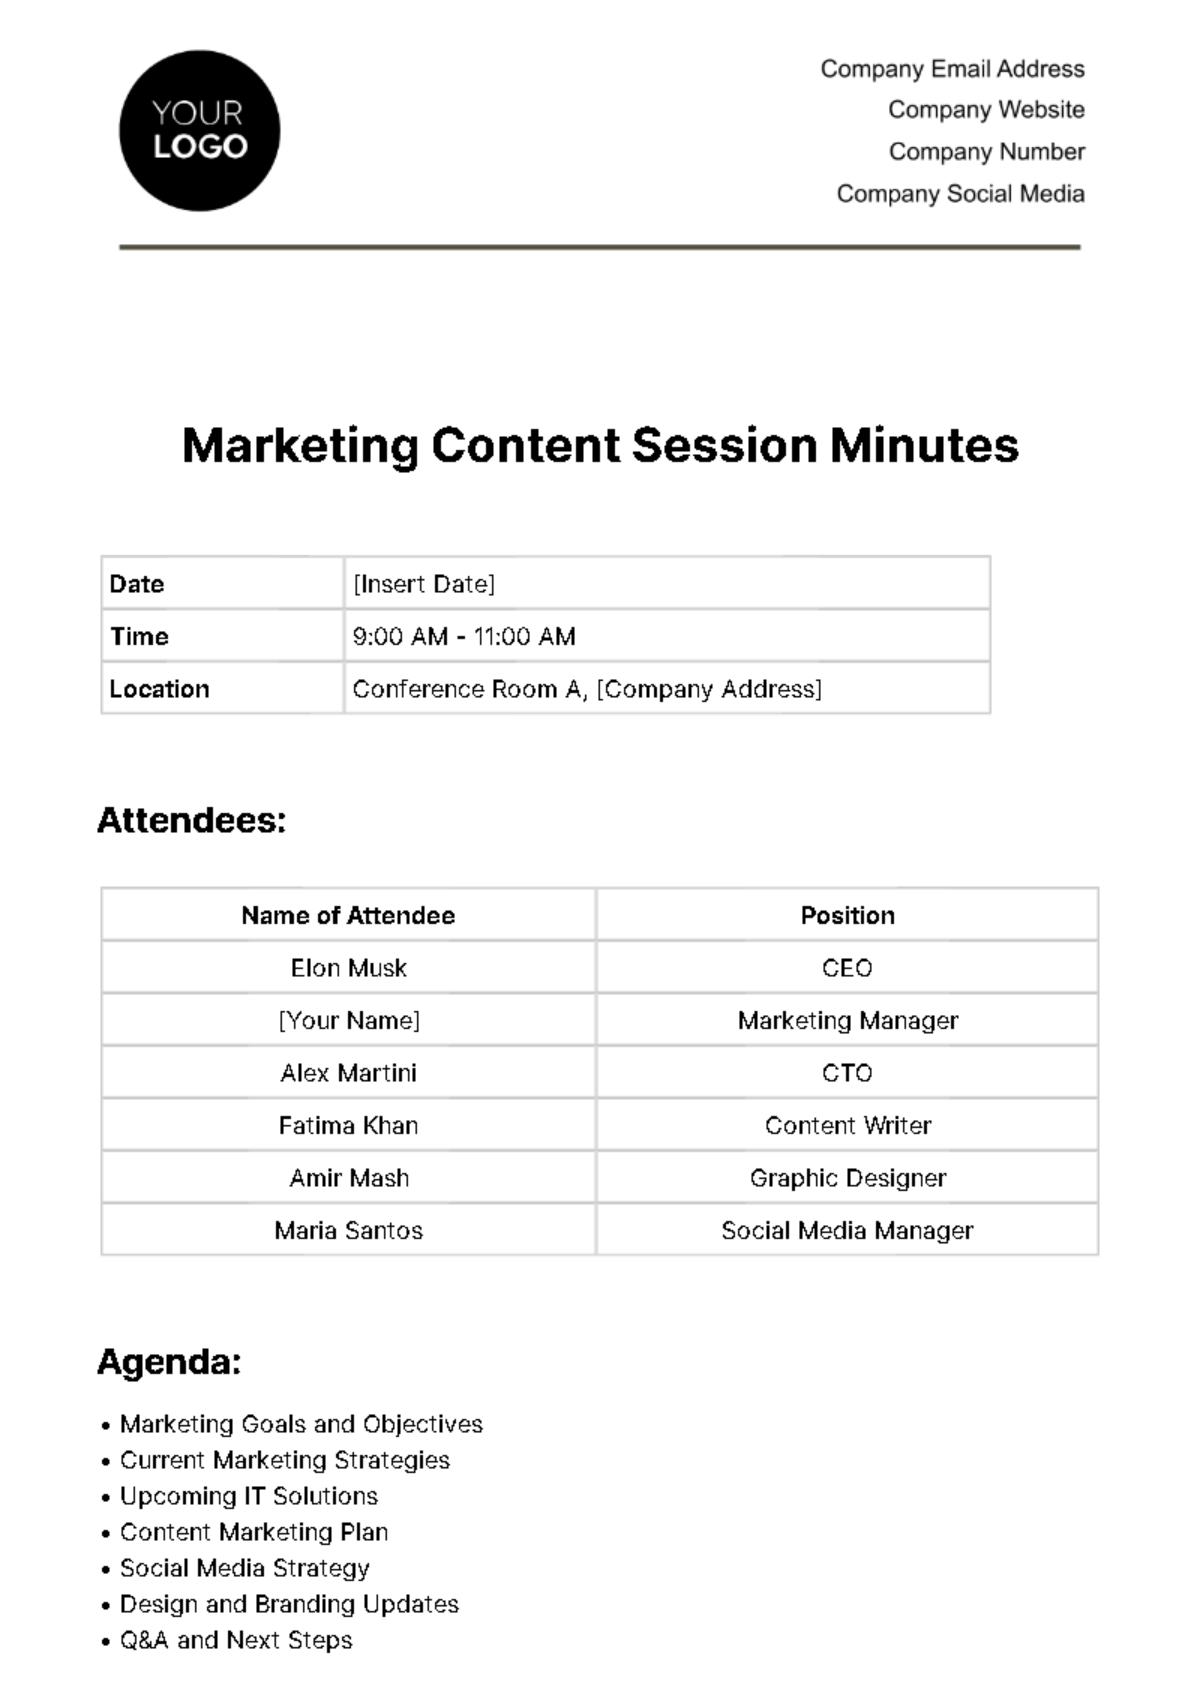 Free Marketing Content Session Minute Template